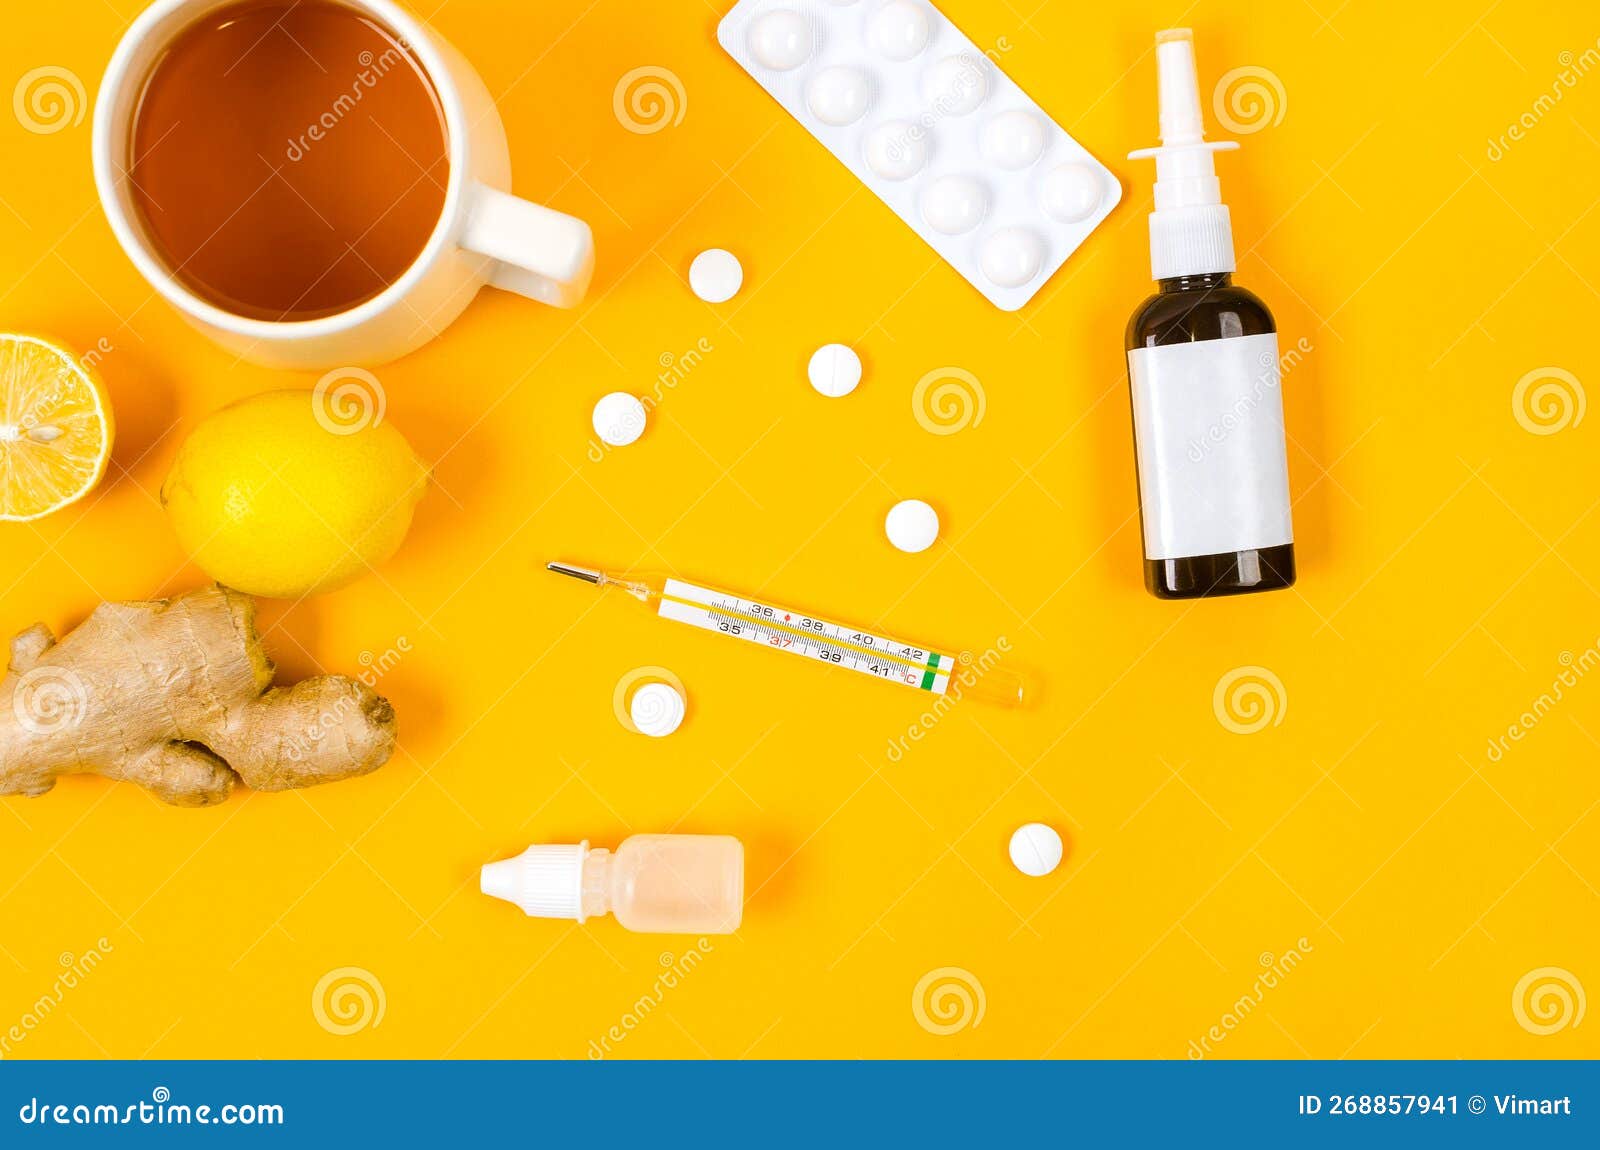 Lemon, ginger, tea, thermometer and white medical pills, traditional and folk methods of treatment. Medicines for treatment- pills, spray bottles, thermometer, Lemon, ginger and tea. traditional and folk methods of treatment. Pharmaceuticals and medicine. Illness concept